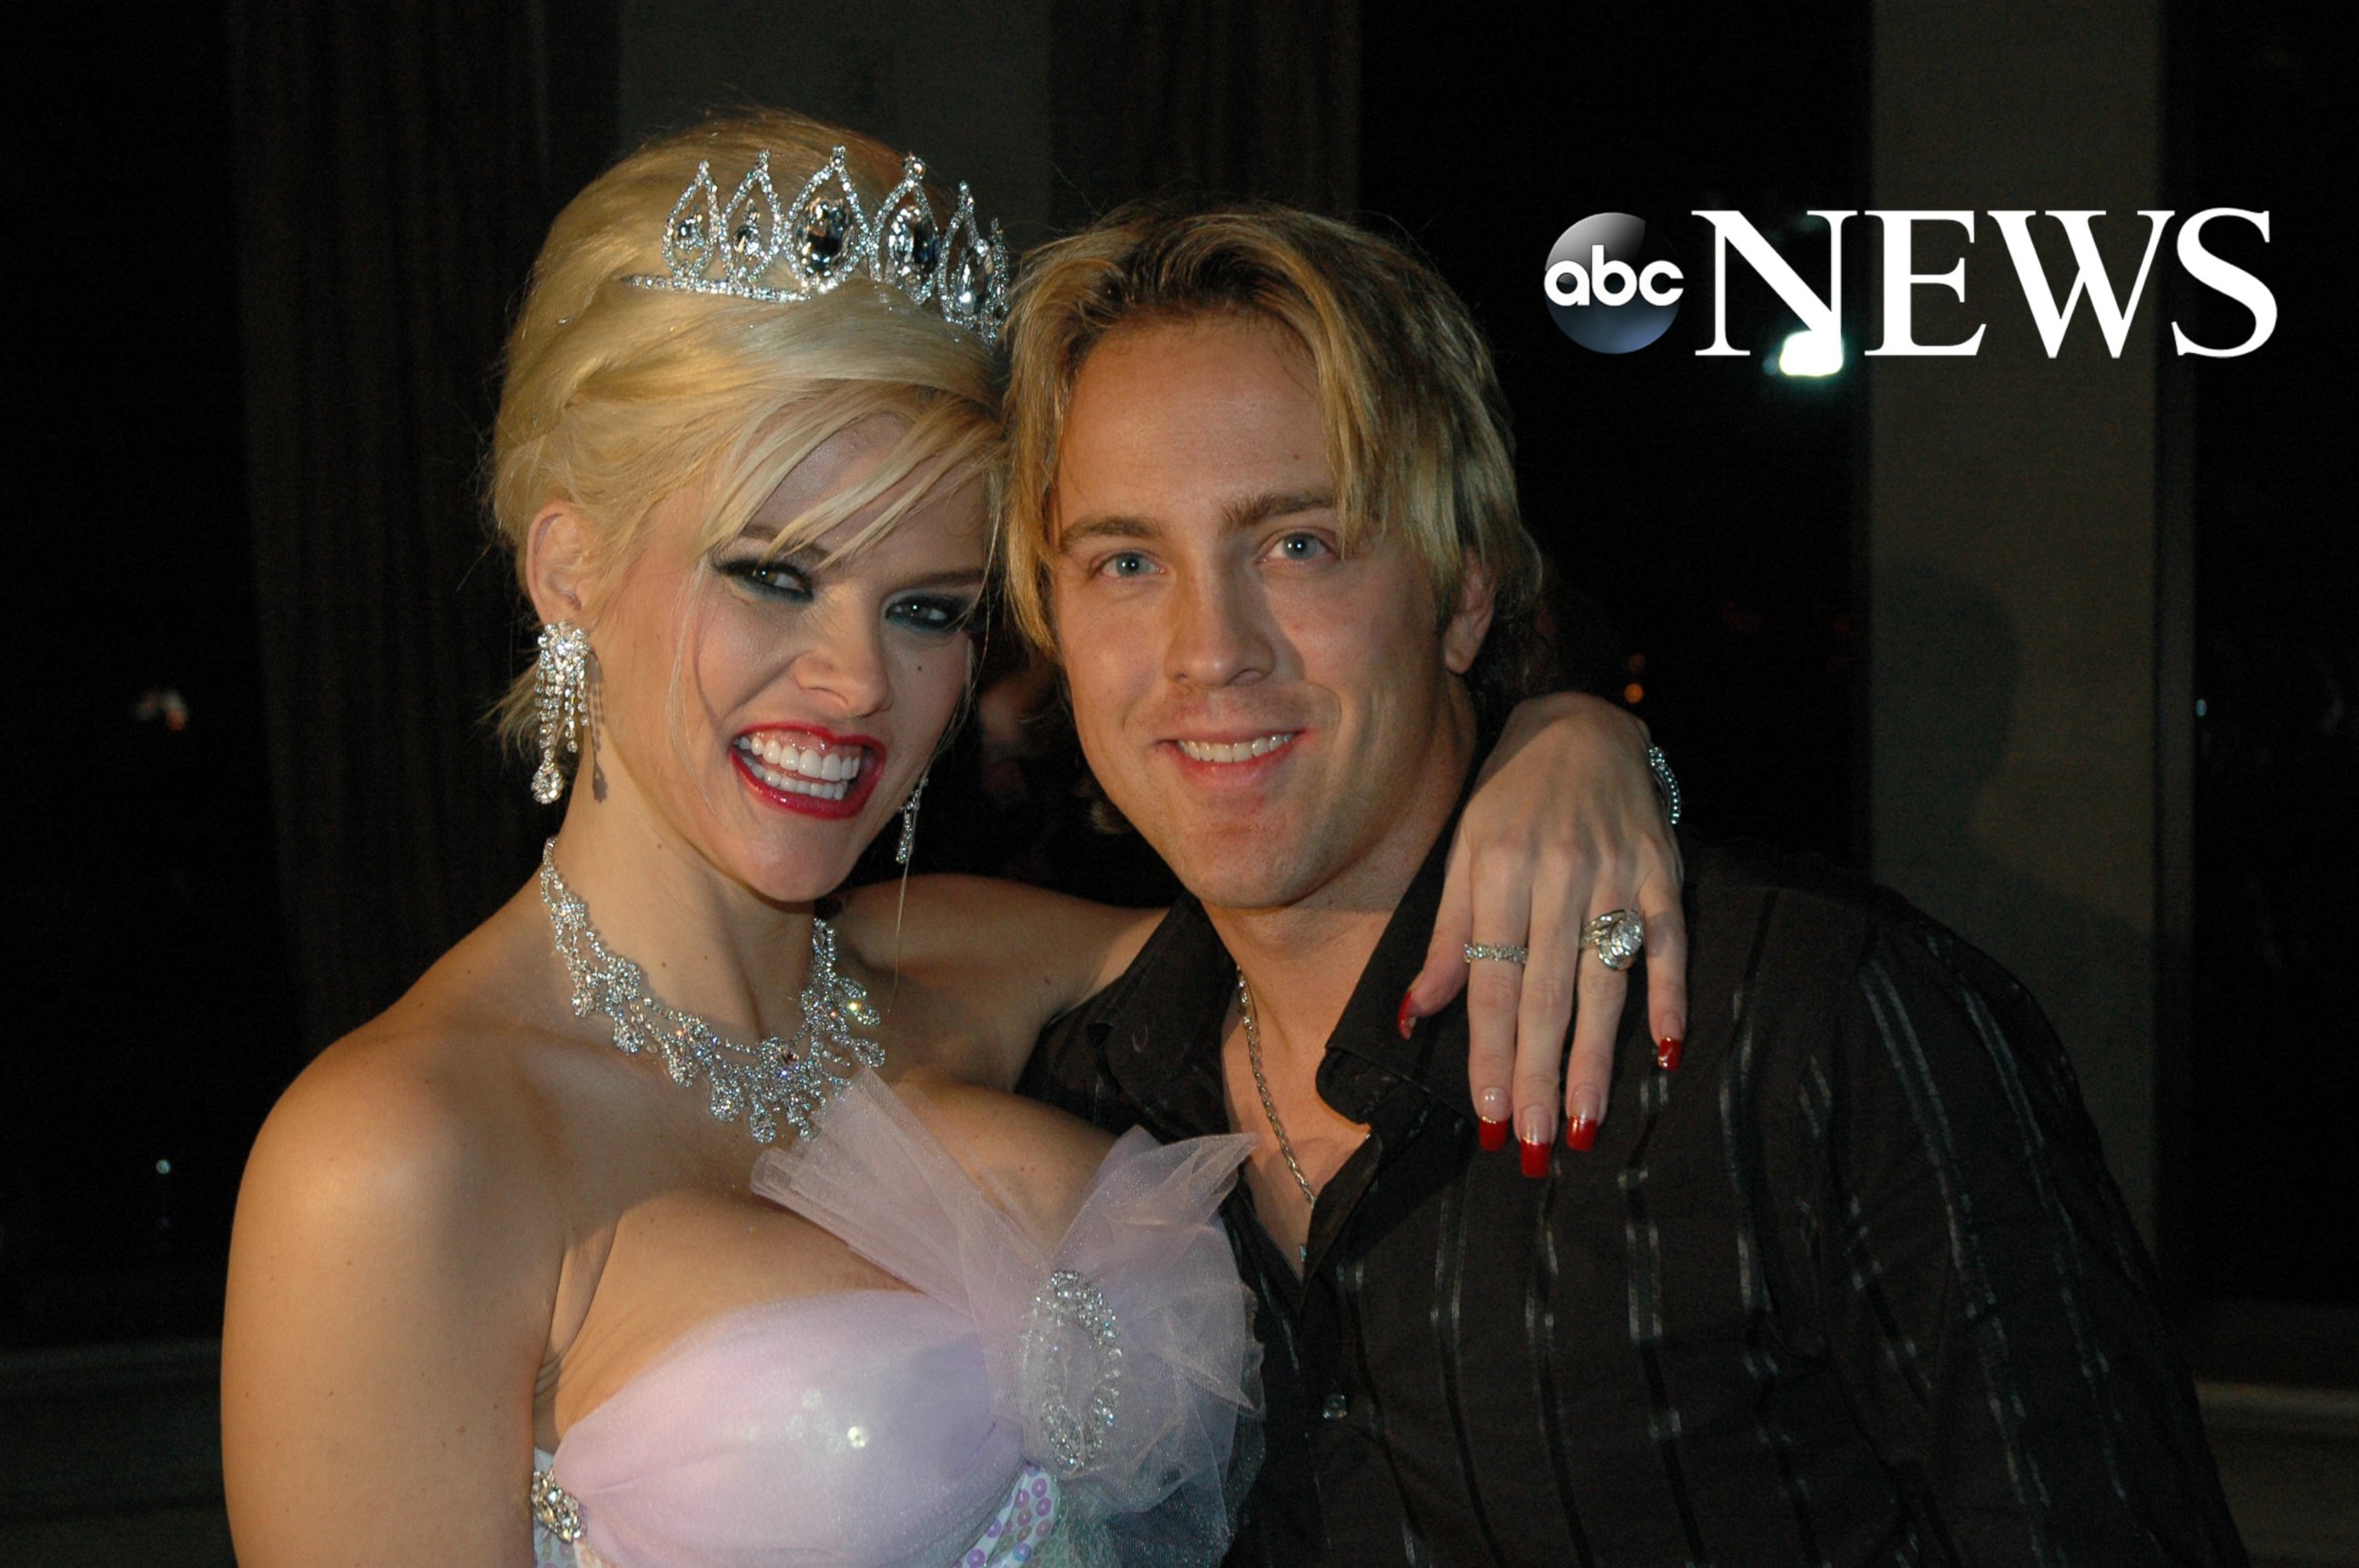 PHOTO: Larry Birkhead said he and Anna Nicole Smith, seen here together in this December 2004 photo, kept their romantic relationship private.